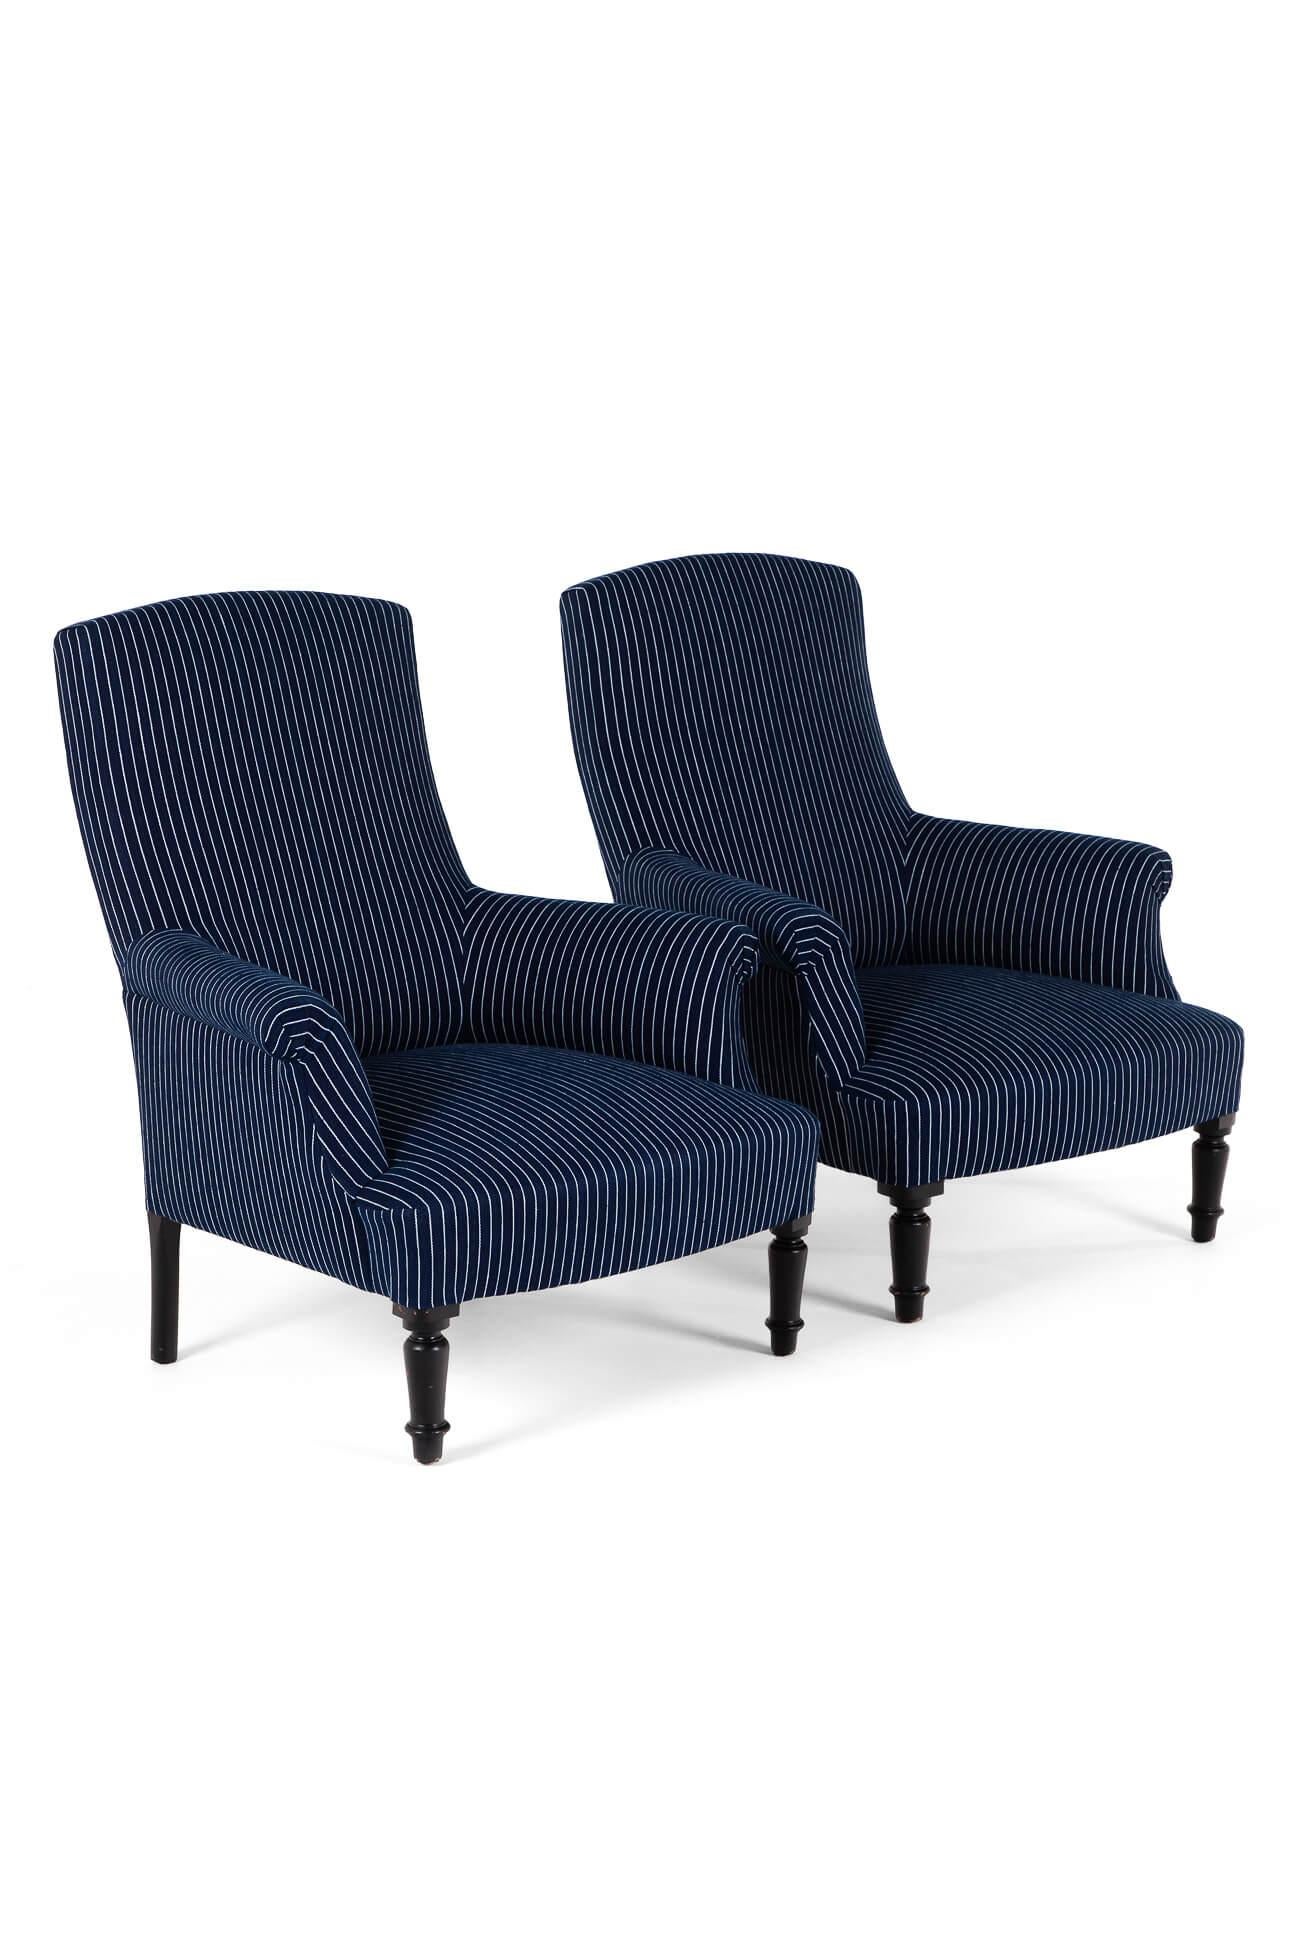 A pair of stunning 19th century French Napoleon III square back armchairs on turned ebonised legs.

Fully reupholstered with hessian and calico to the walnut frame, finished in a woven navy and white ticking stripe.

The price is for the pair.